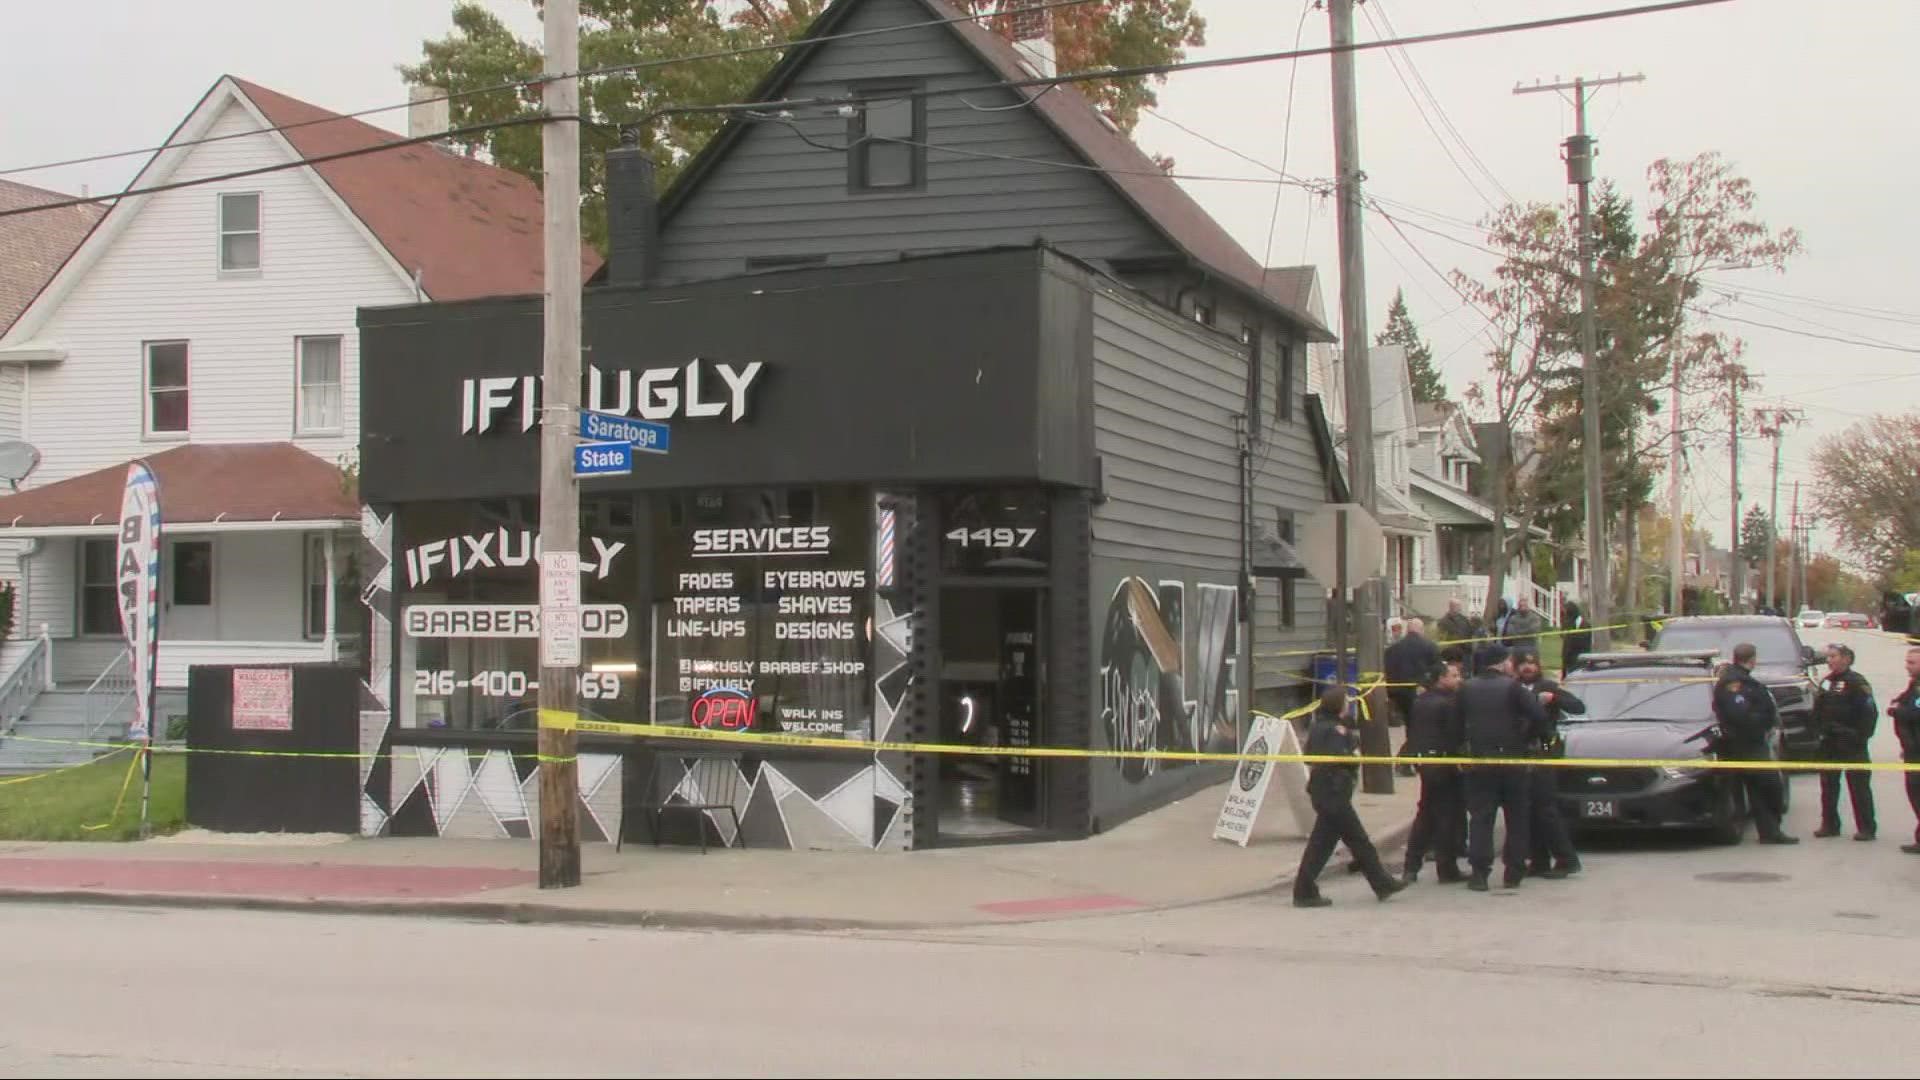 Police say a man entered the shop and began firing at people inside. The man then left in a red, four-door vehicle.